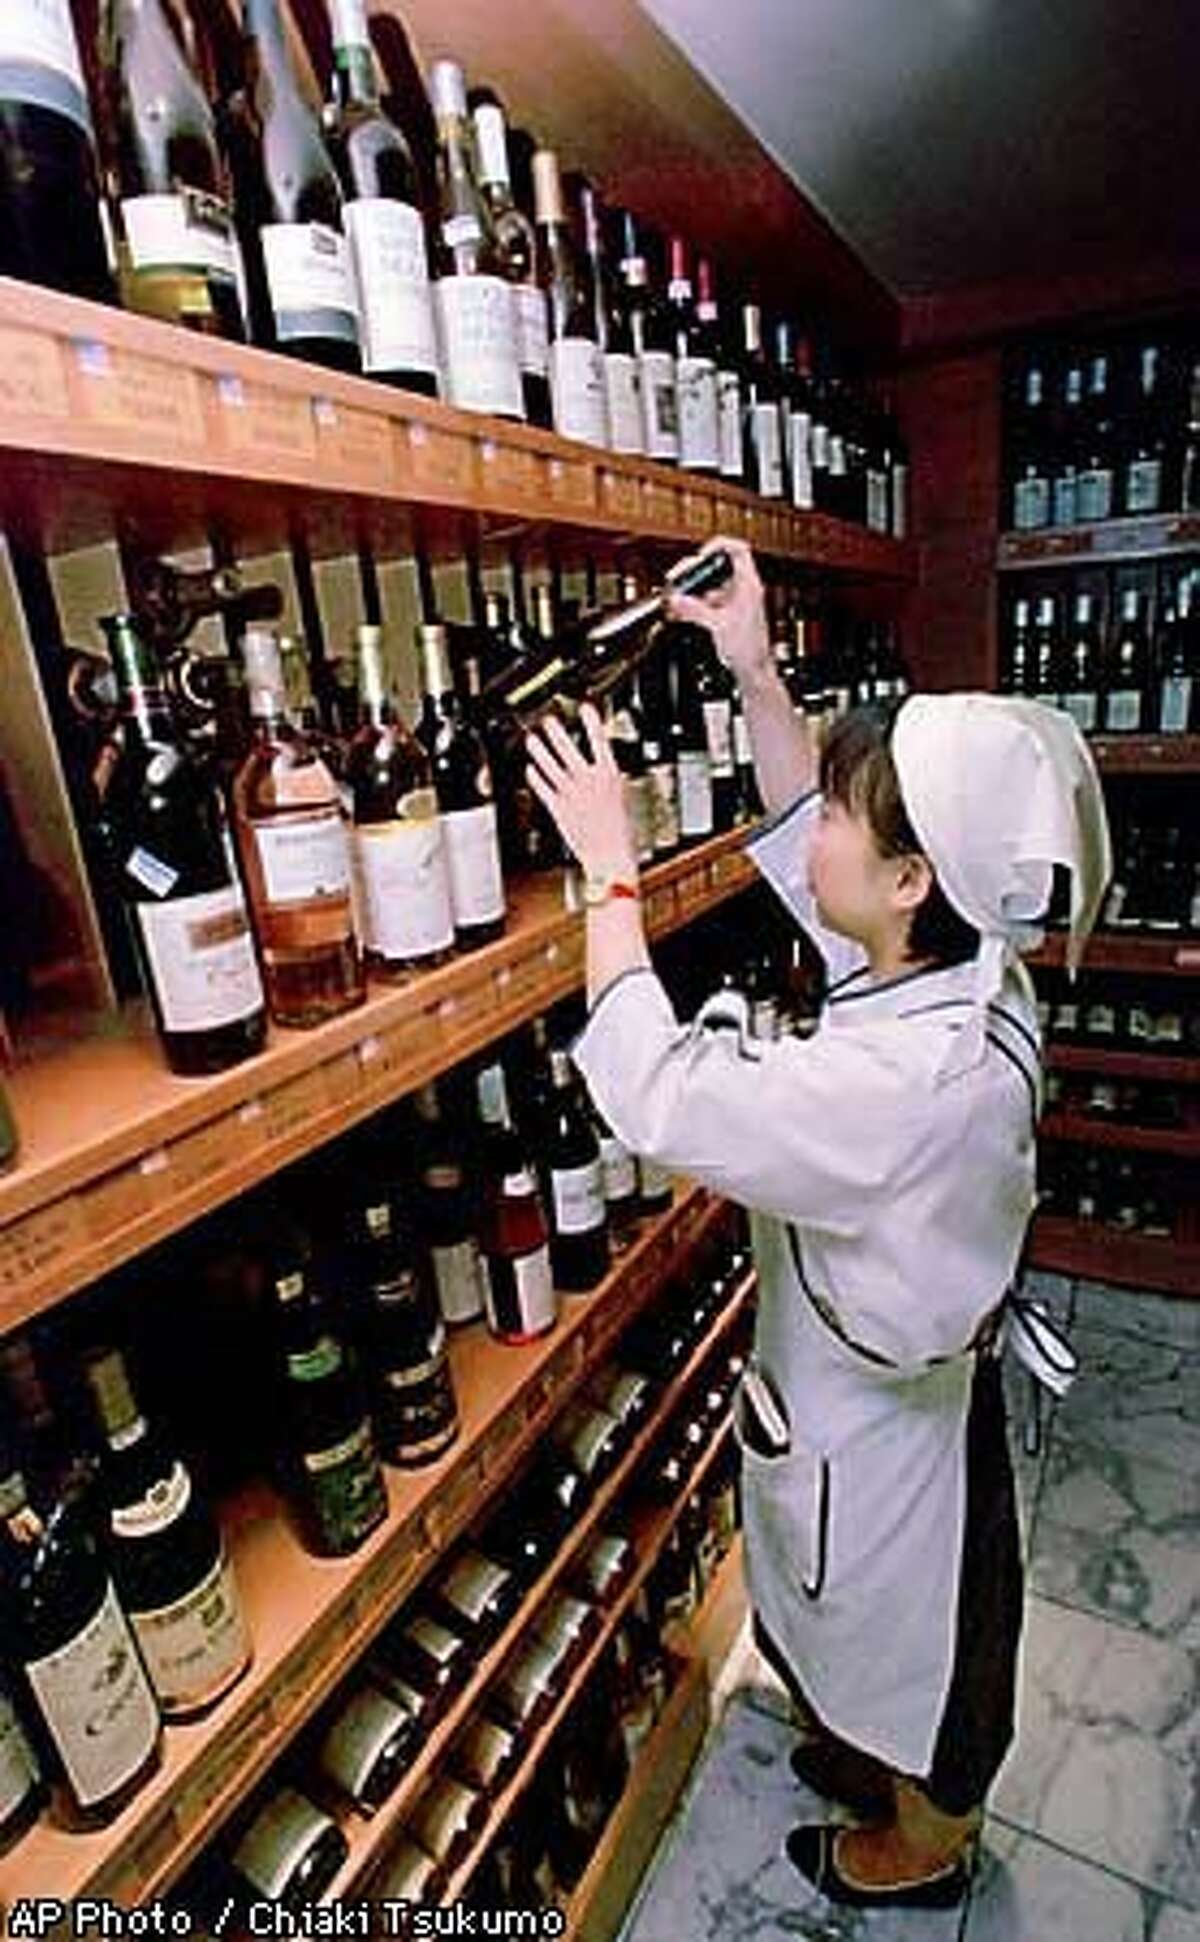 A sales clerk checked bottles of California wine in a Tokyo department store. Associated Press Photo by Chiaki Tsukumo